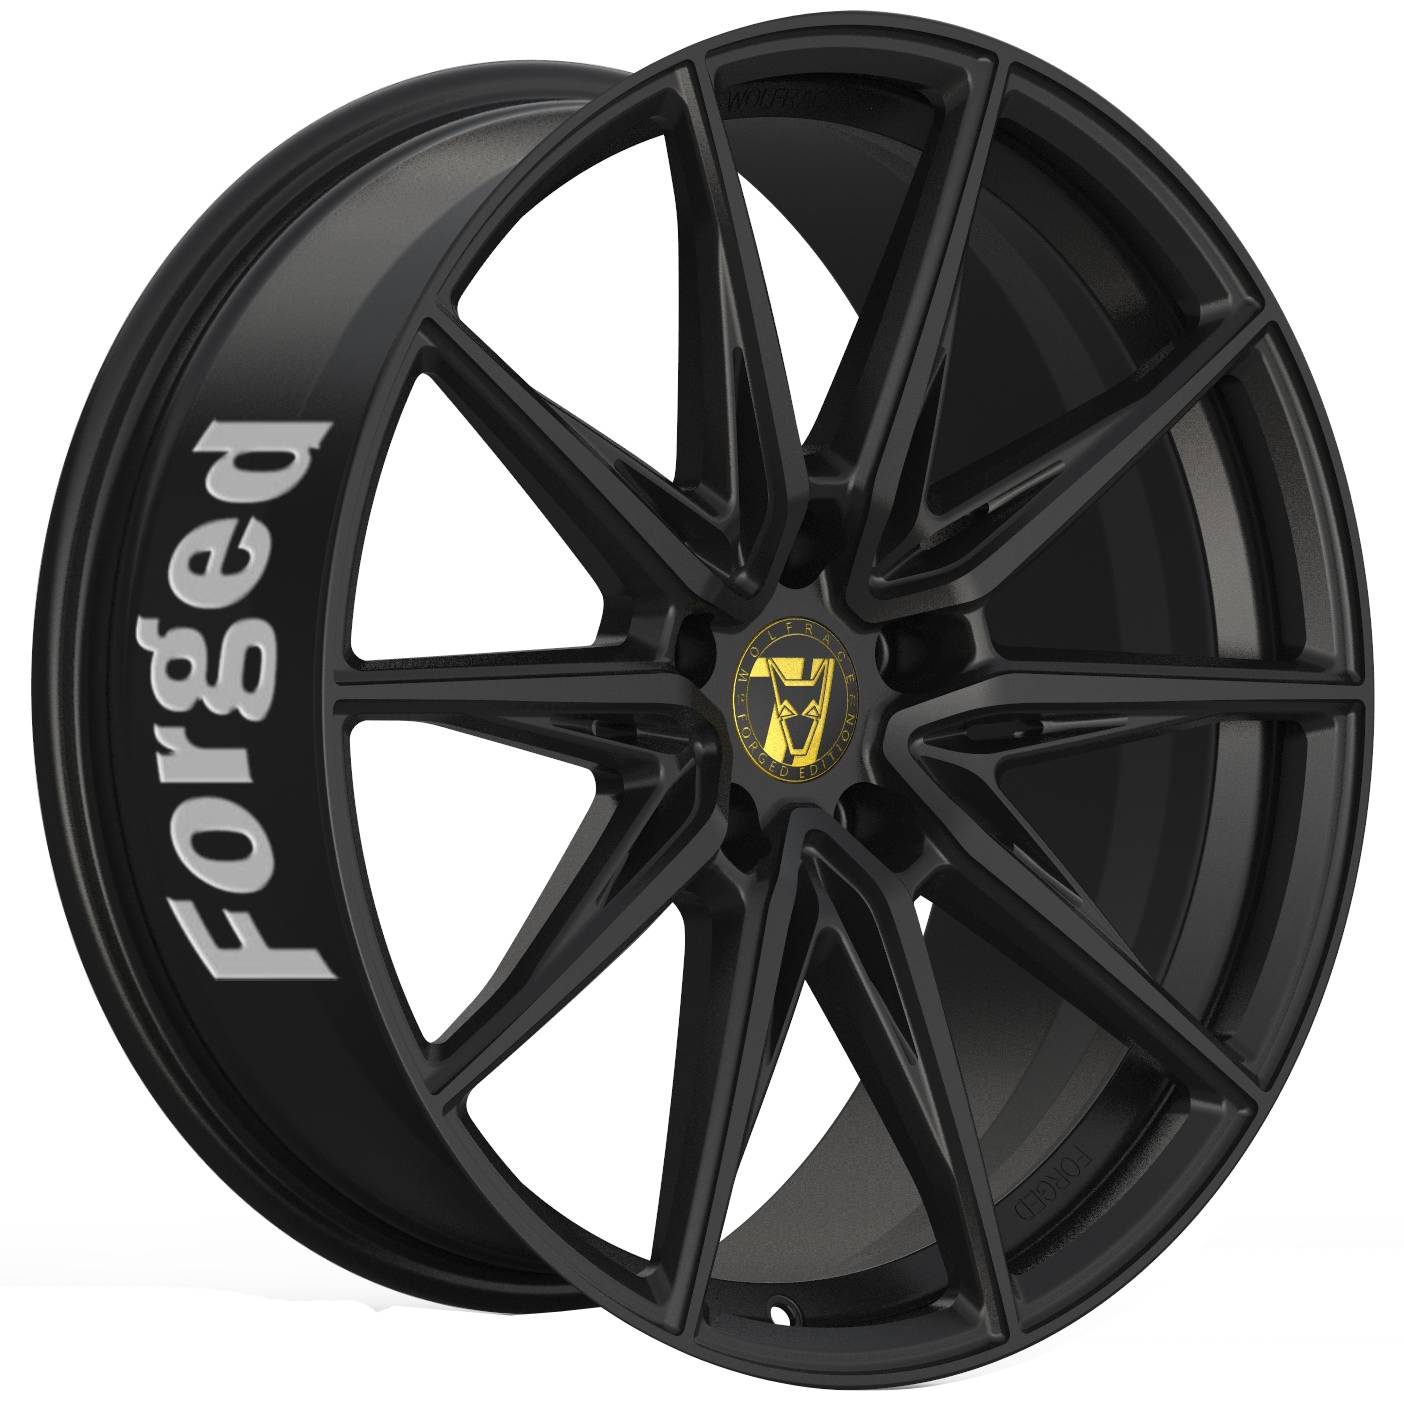 Demon Wheels 71 Forged Edition Urban Racer Forged [9.5x24] -5x120- ET 40